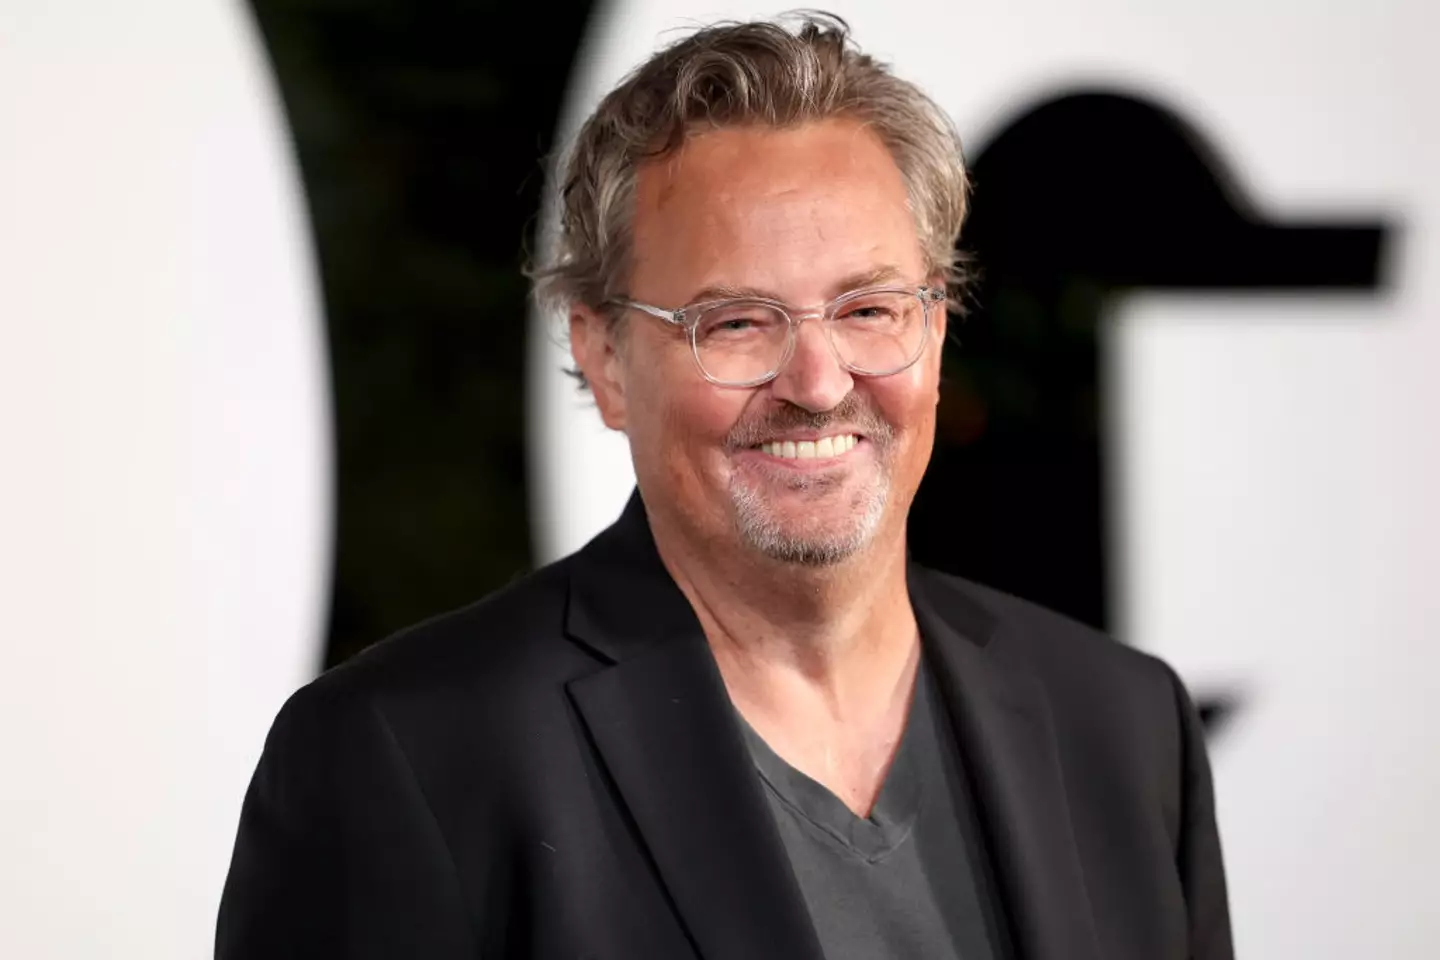 A report has confirmed Matthew Perry's cause of death.